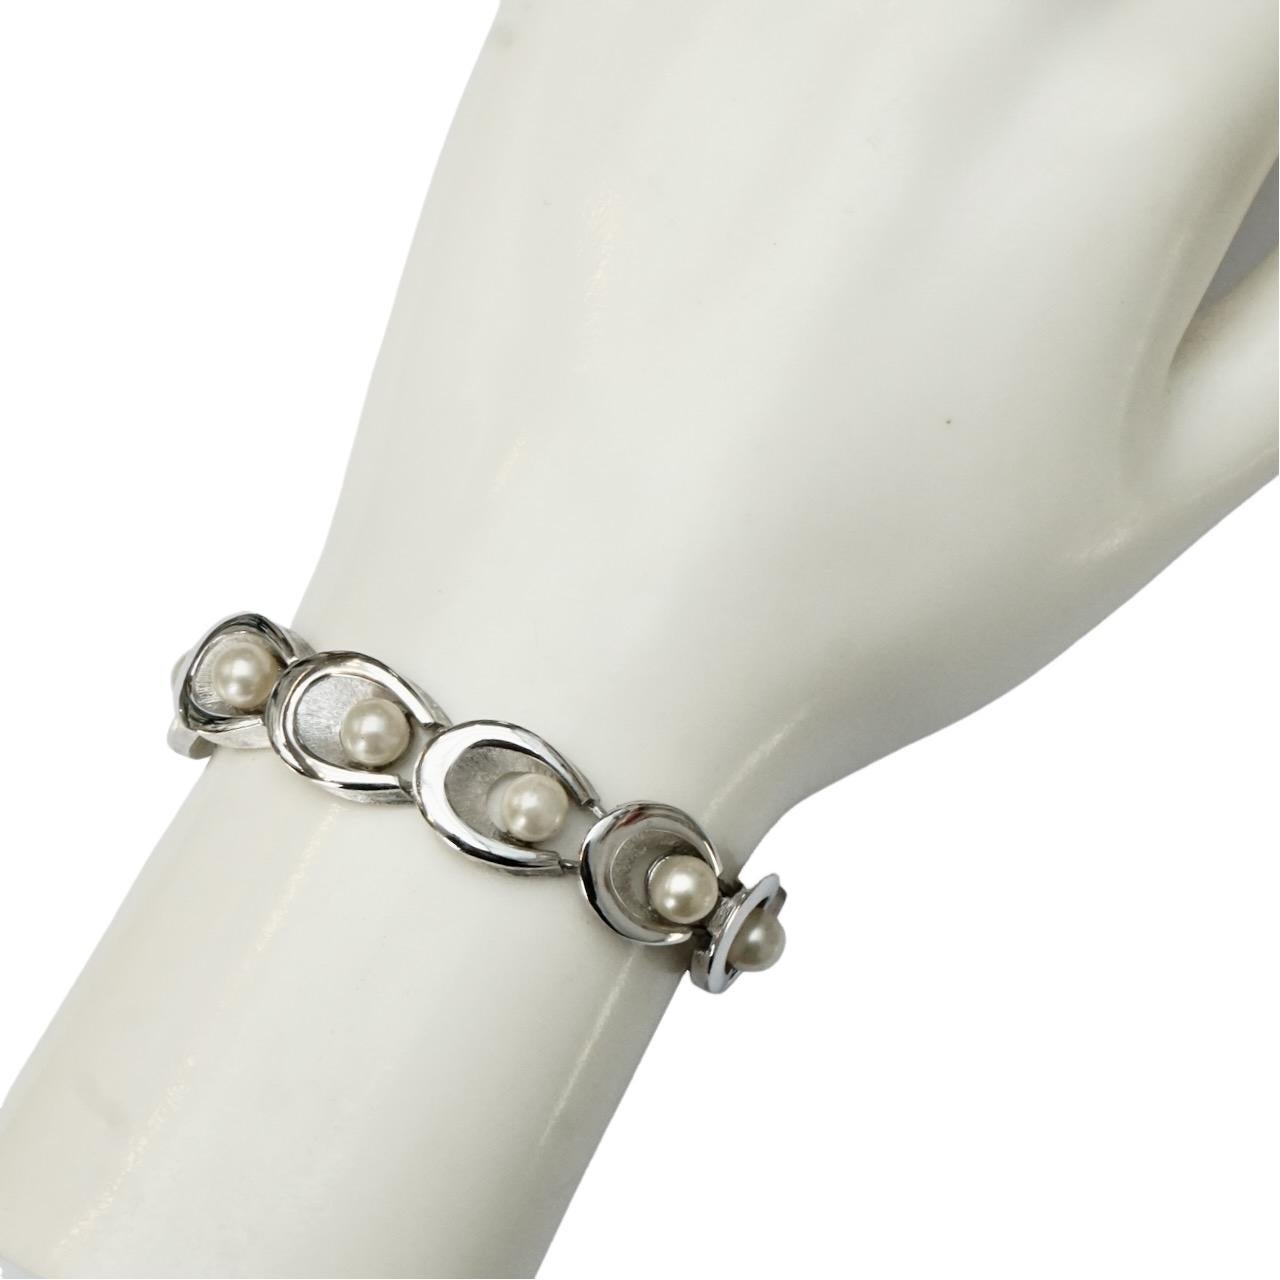 Trifari Silver Plated Brushed and Shiny Bracelet with Faux Pearls circa 1960s For Sale 4